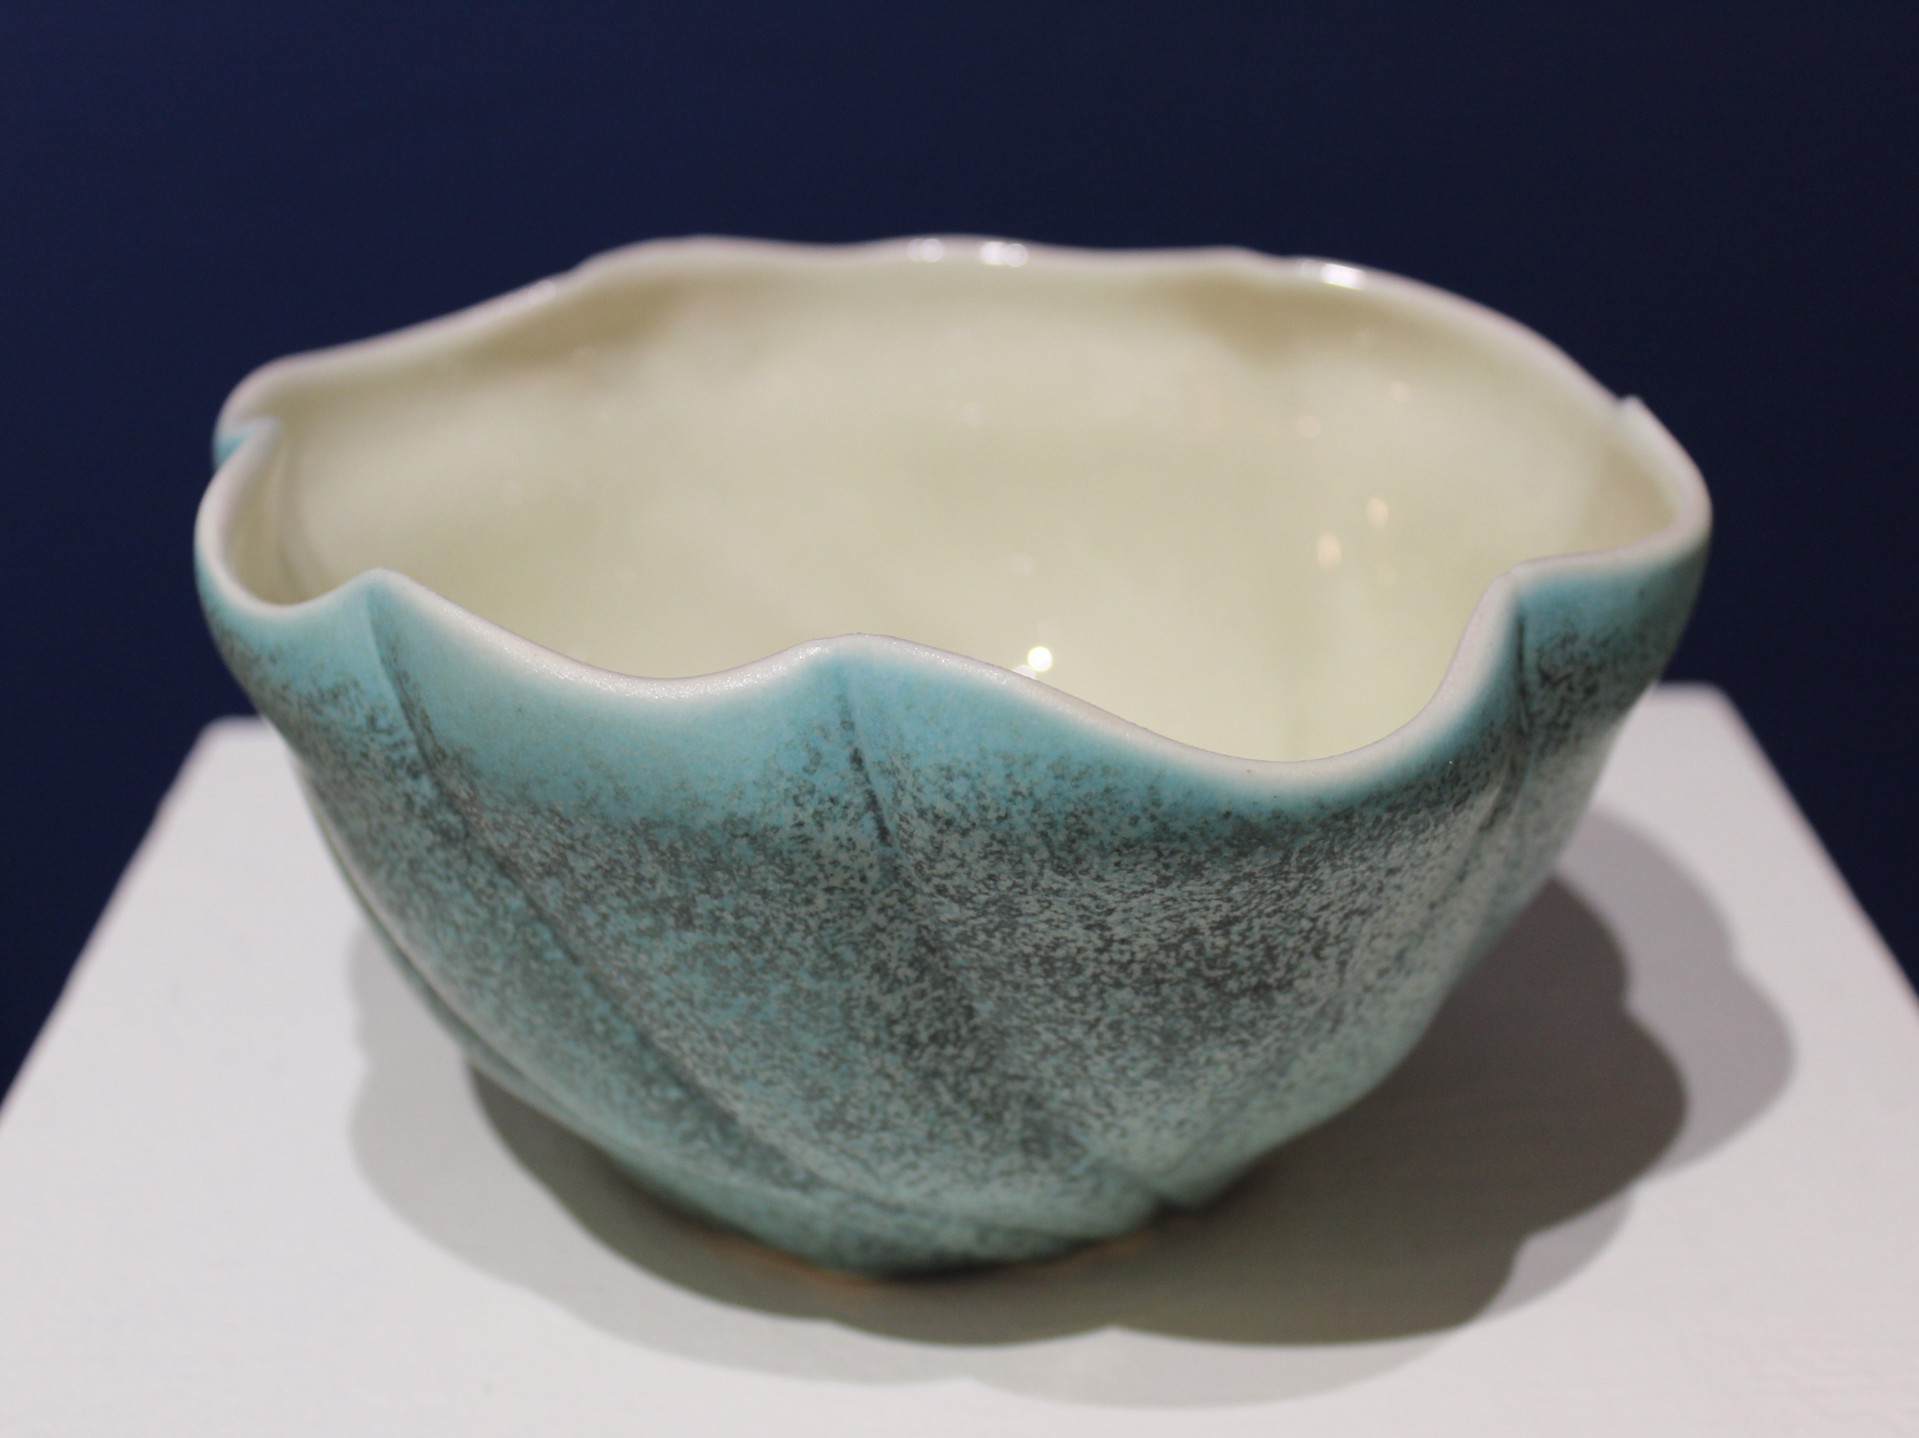 Blue Bowl (Scallop) by Danielle Inabinet